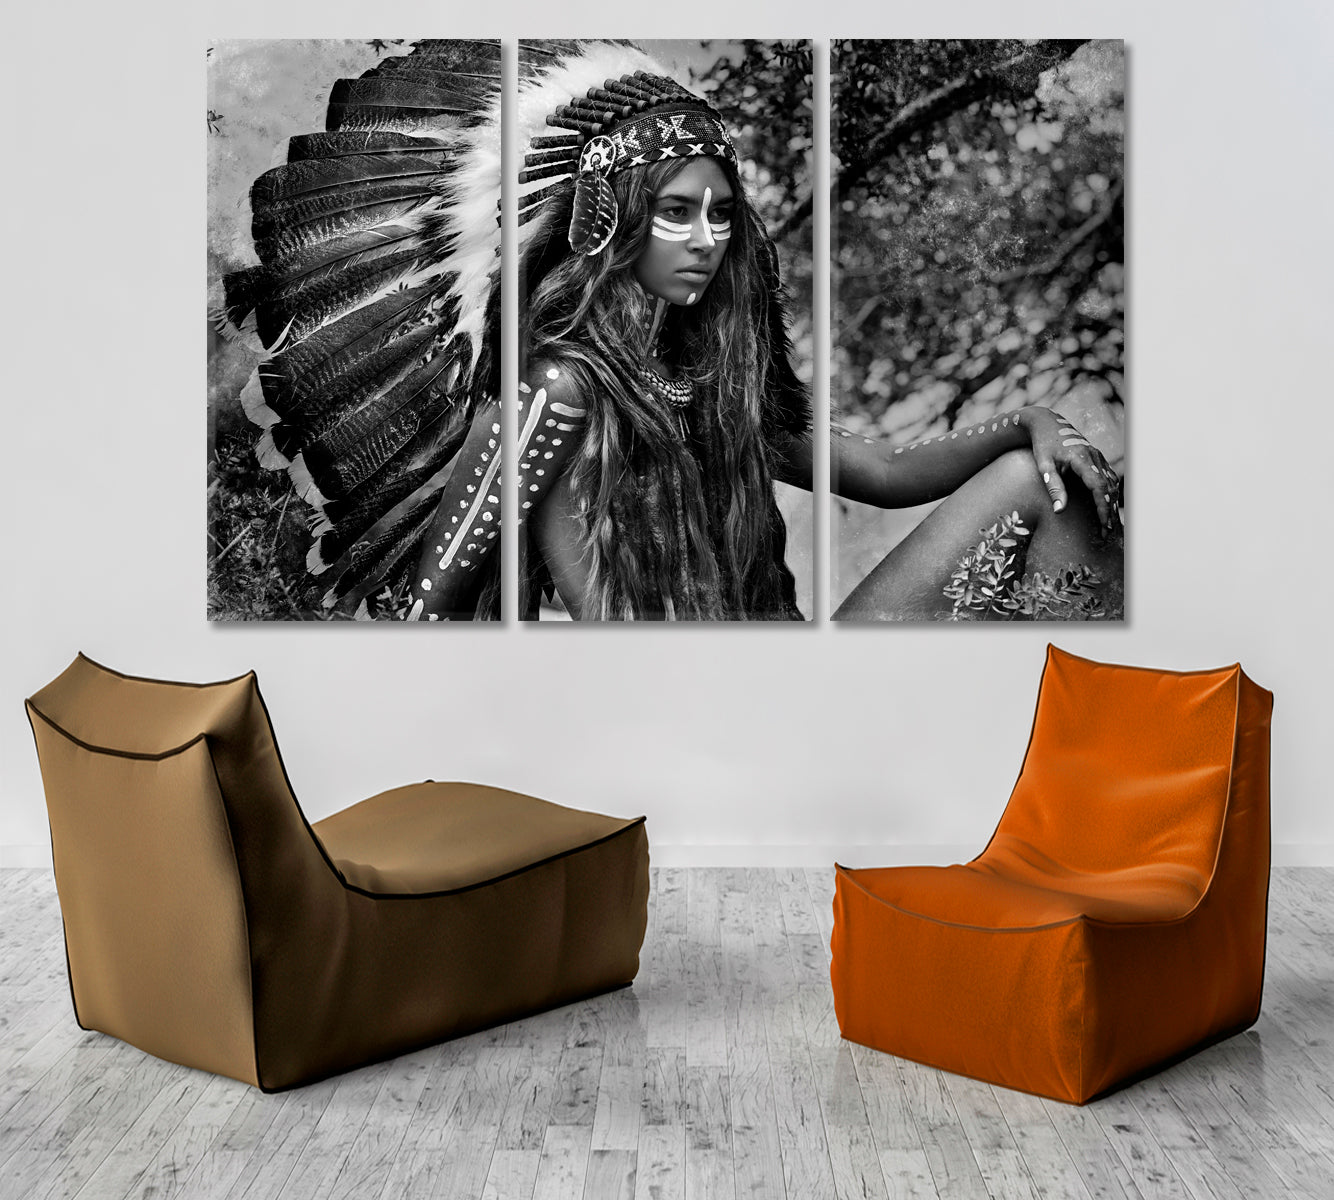 CHIEFTAIN Attractive Indian Woman Black And White Portrait Photo Art Artesty 3 panels 36" x 24" 